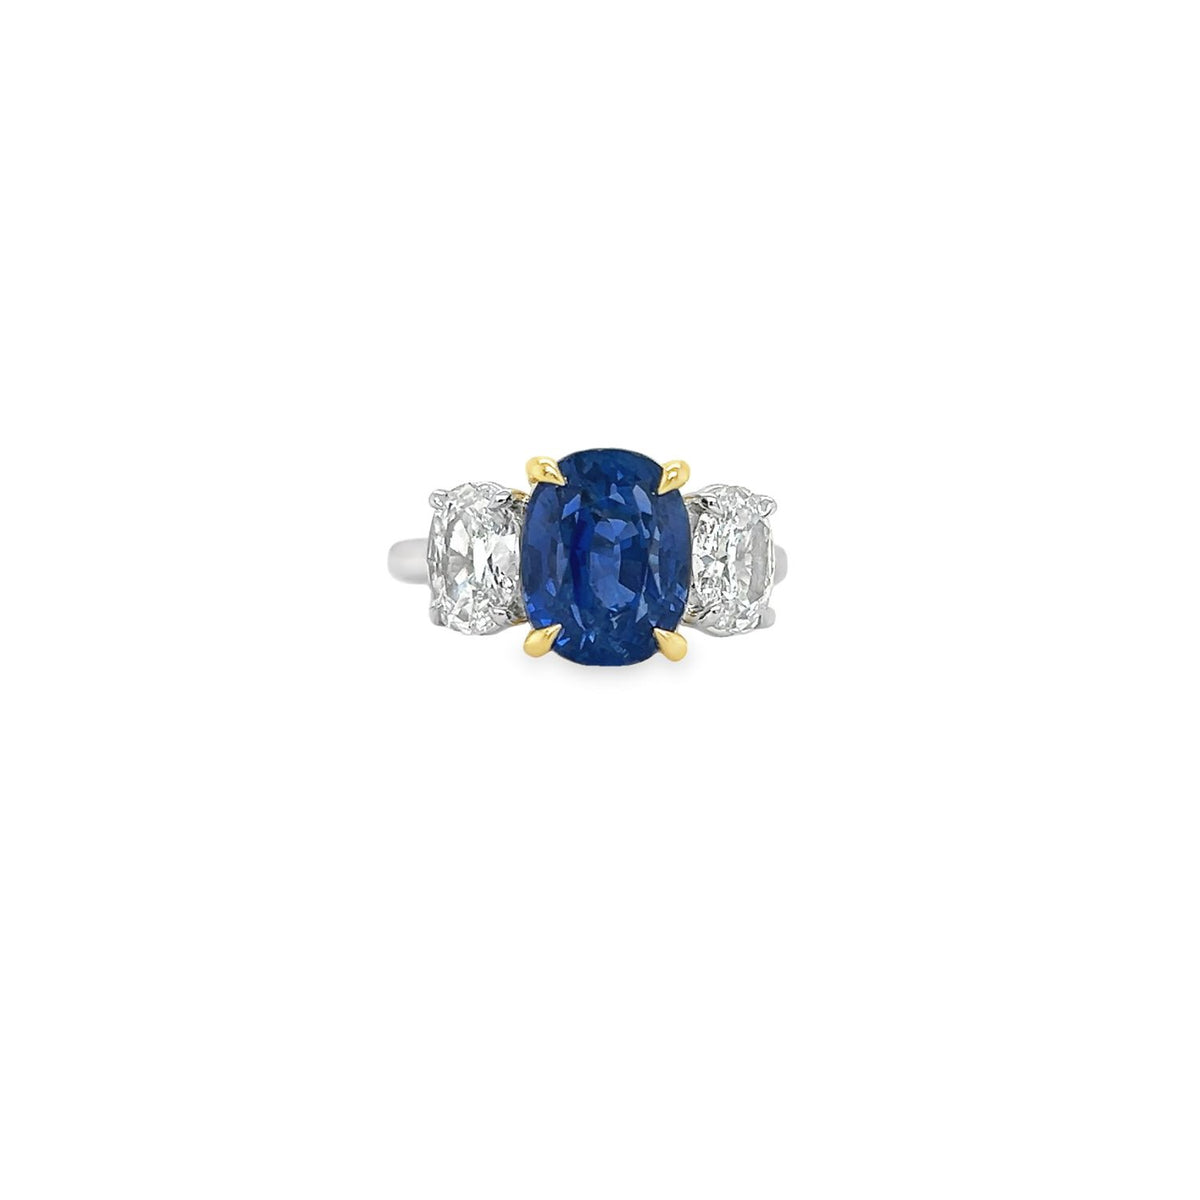 Unique Sapphire and Diamond Ring with GIA Certificate